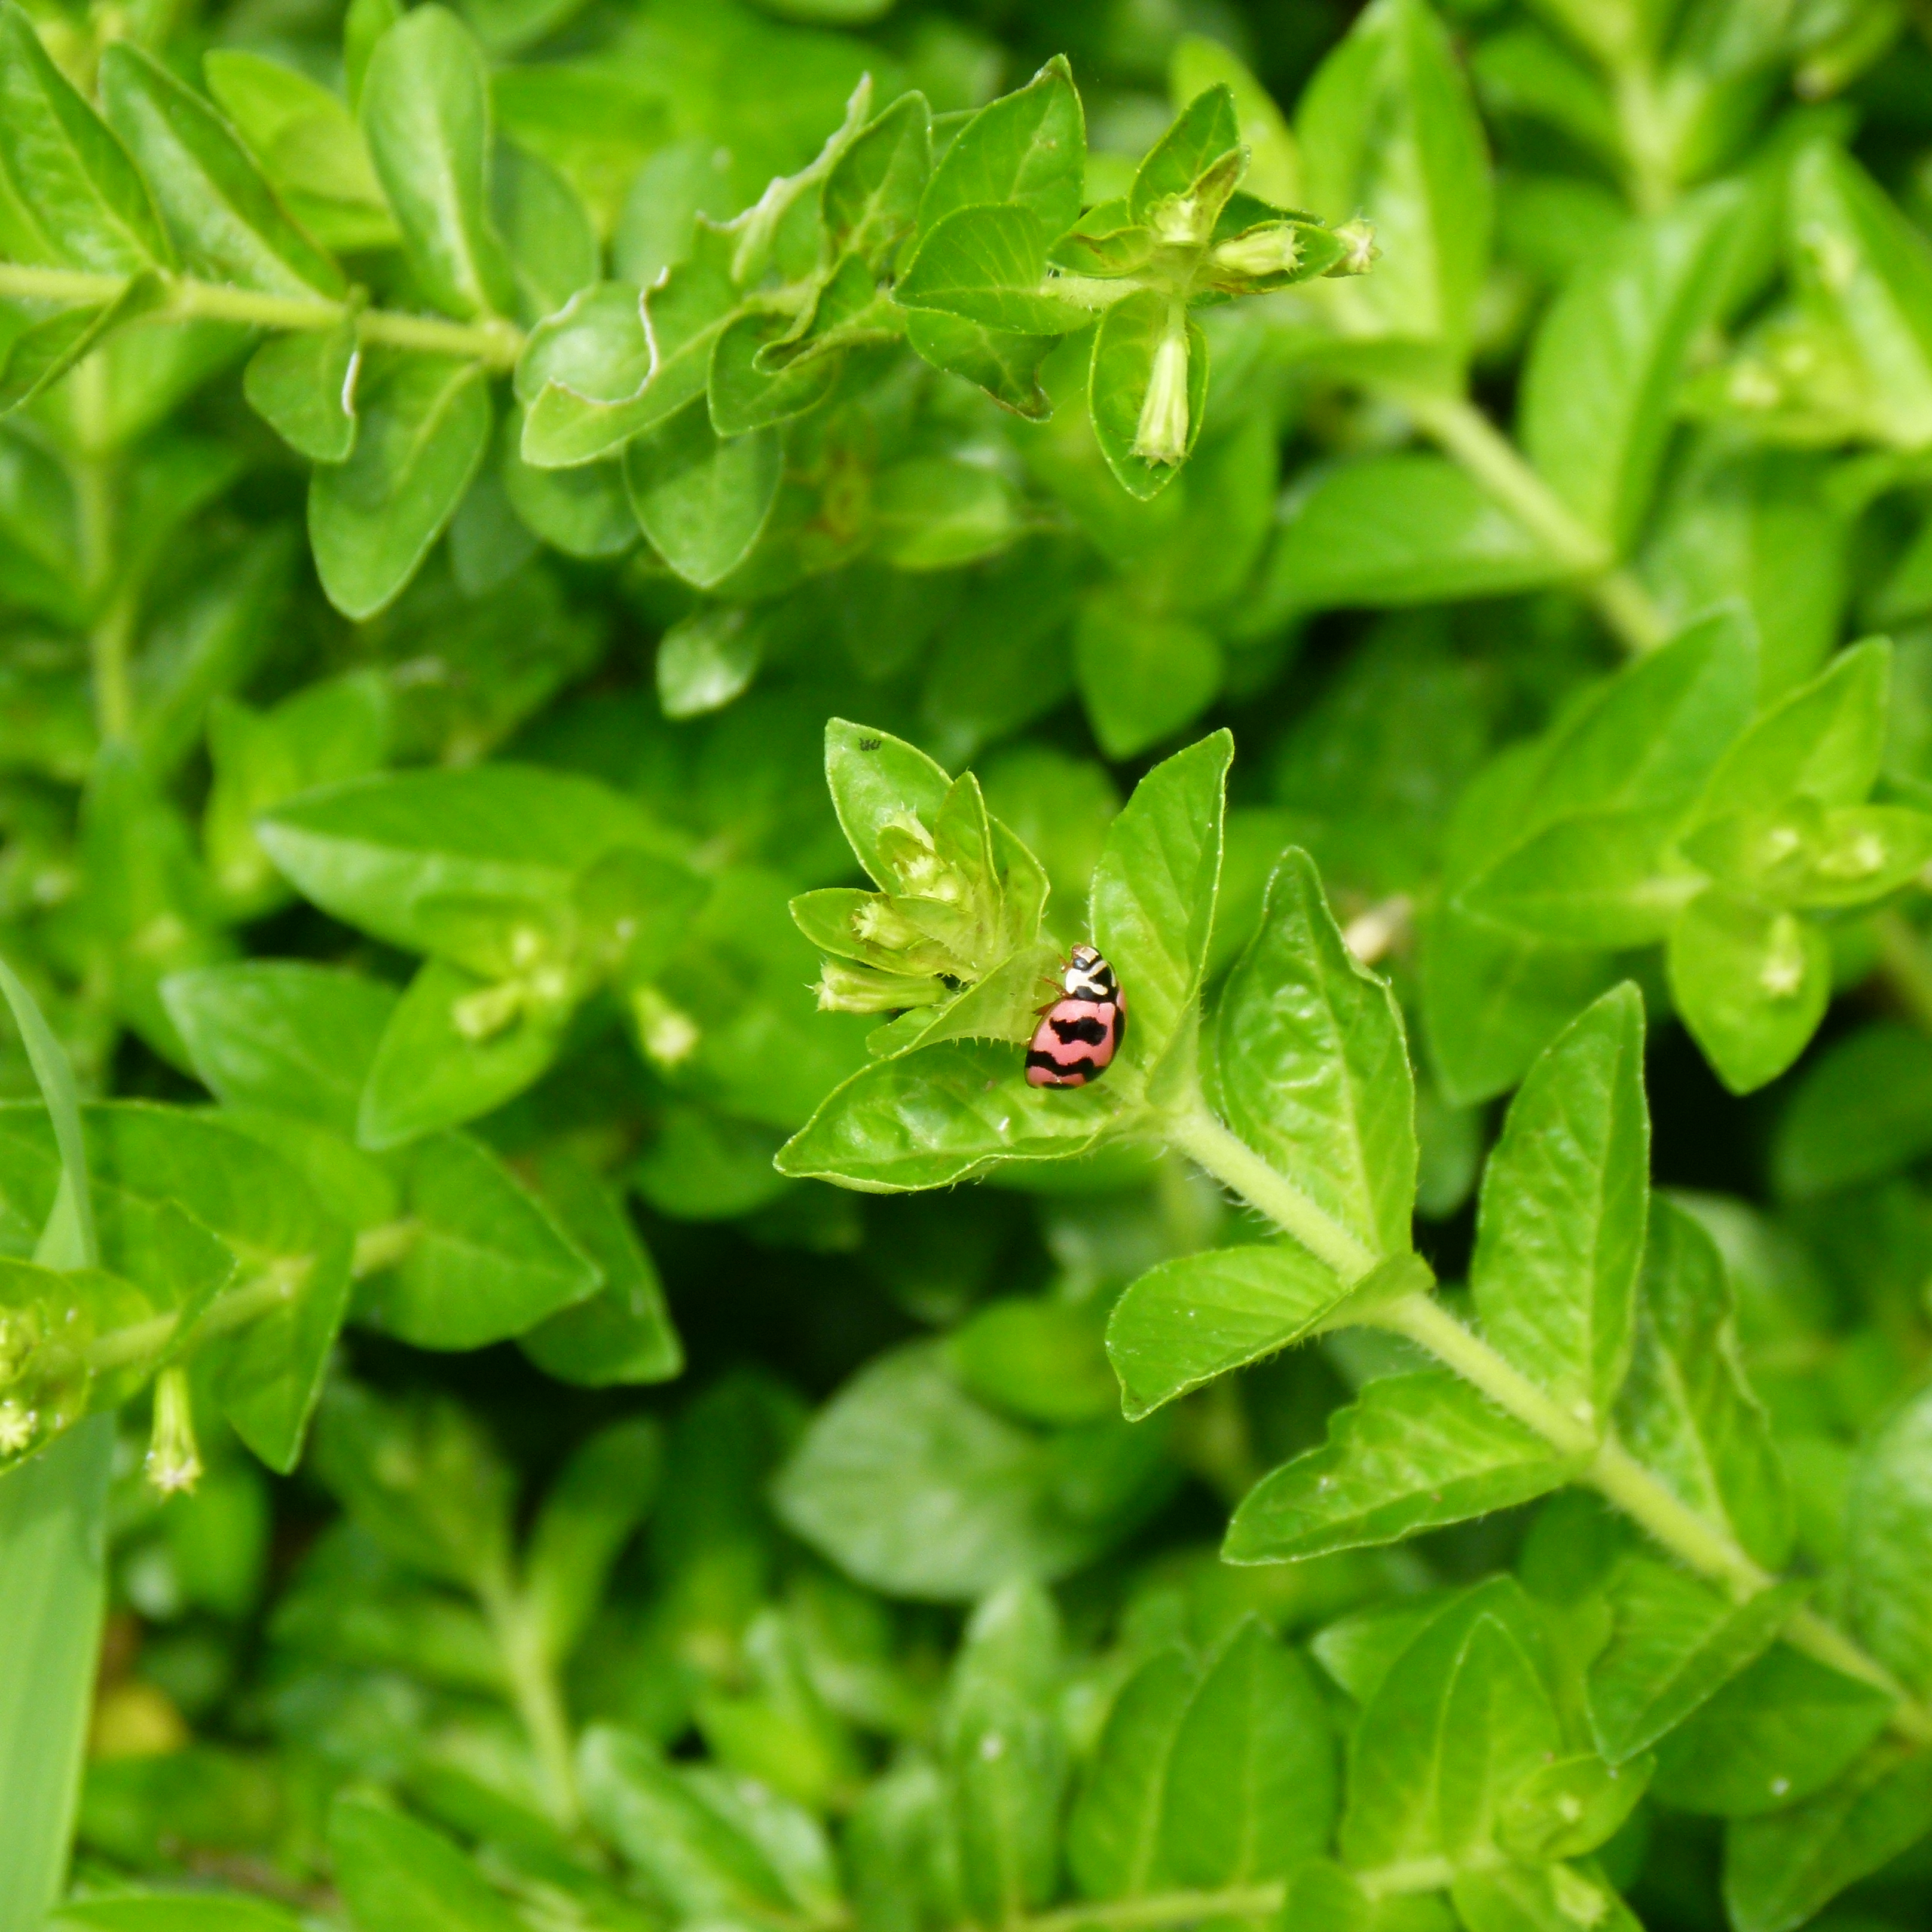 This little ladybeetle is showing the importance of standing out and making an impression online.